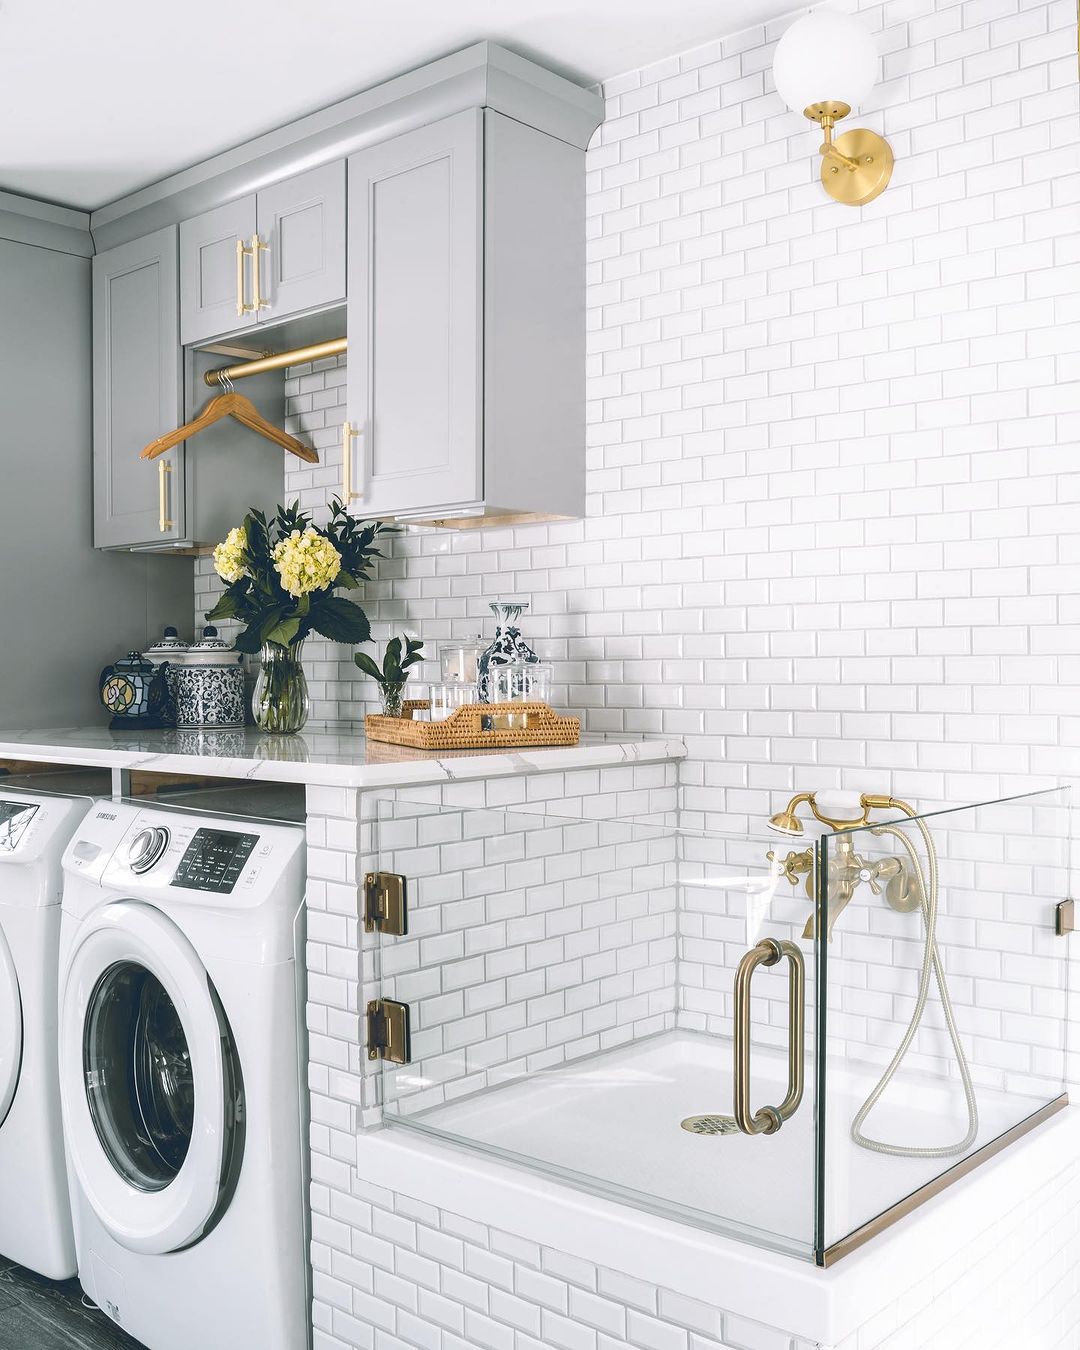  Elegant Subway Tile with Brass Accents